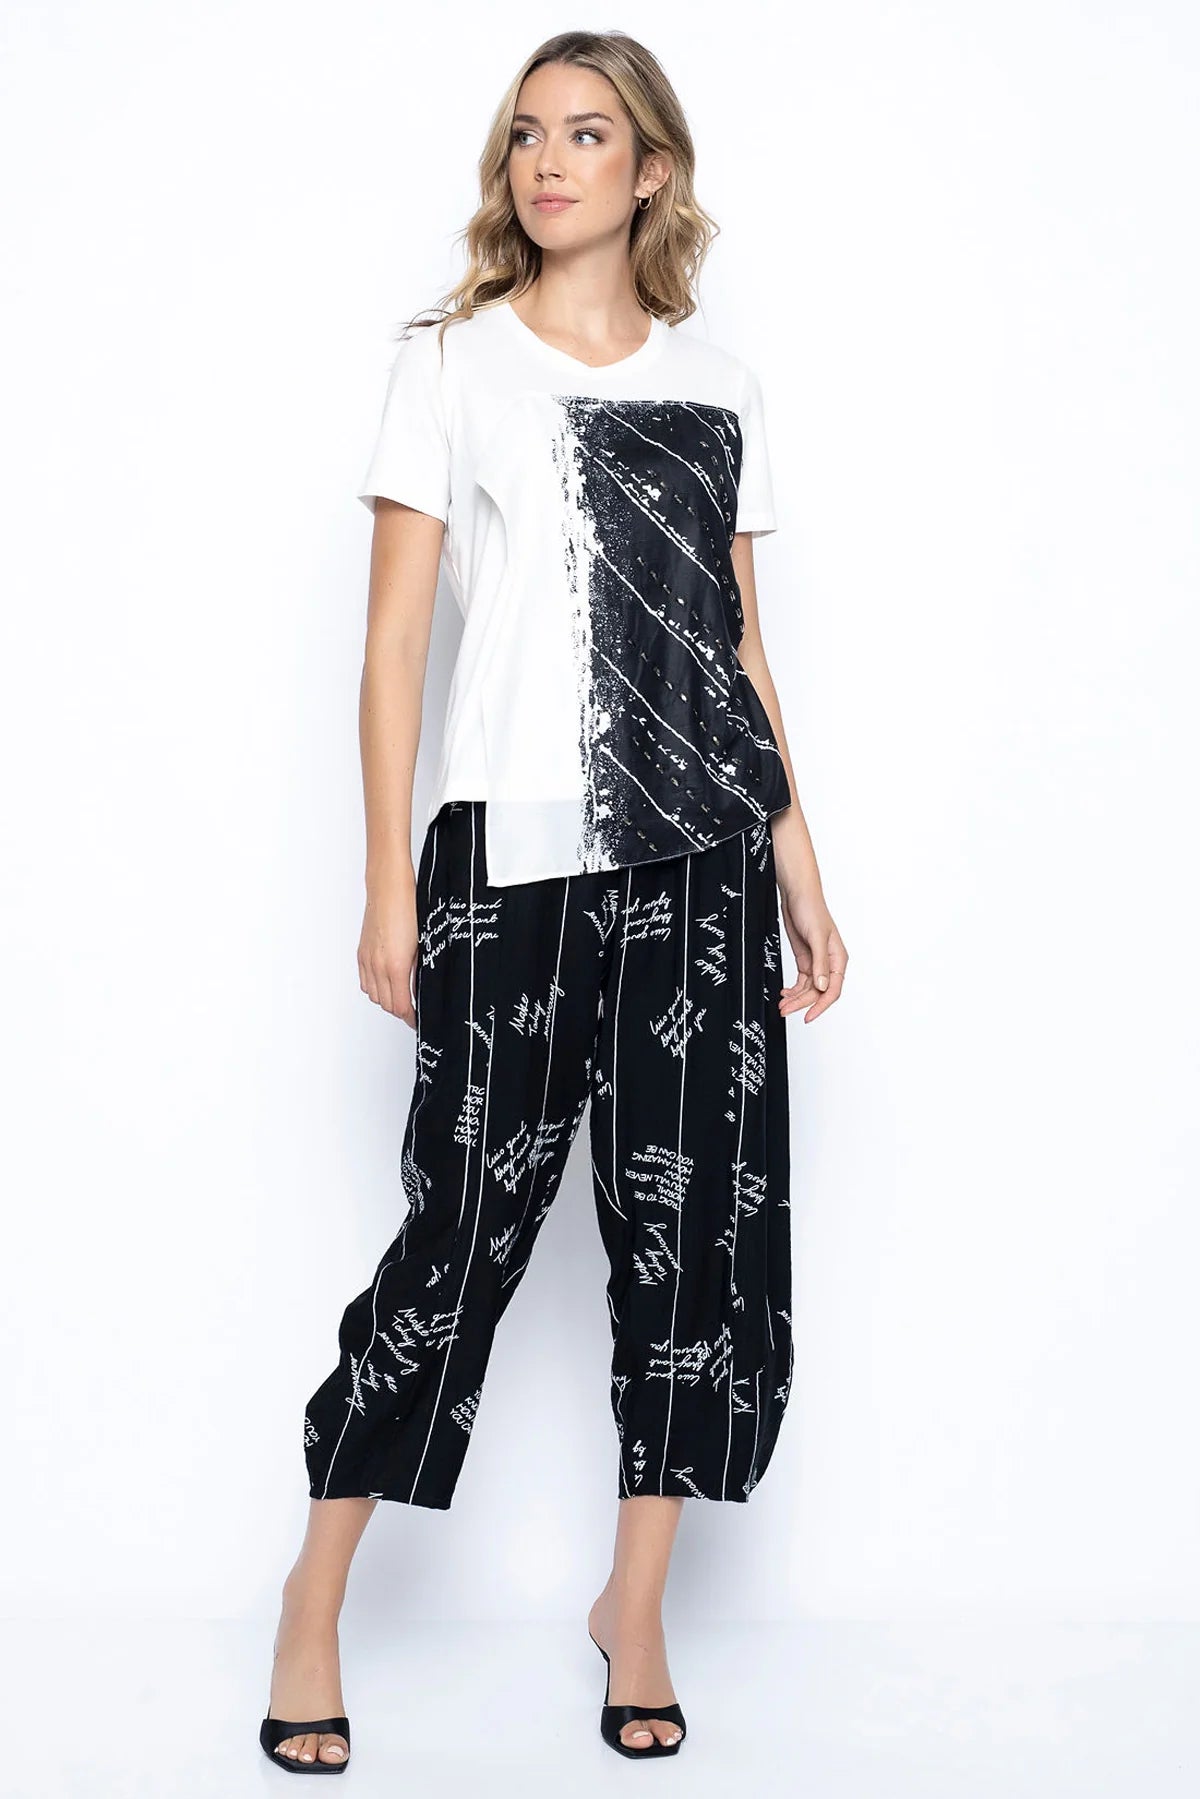 Picadilly Blk/White Balloon Pants